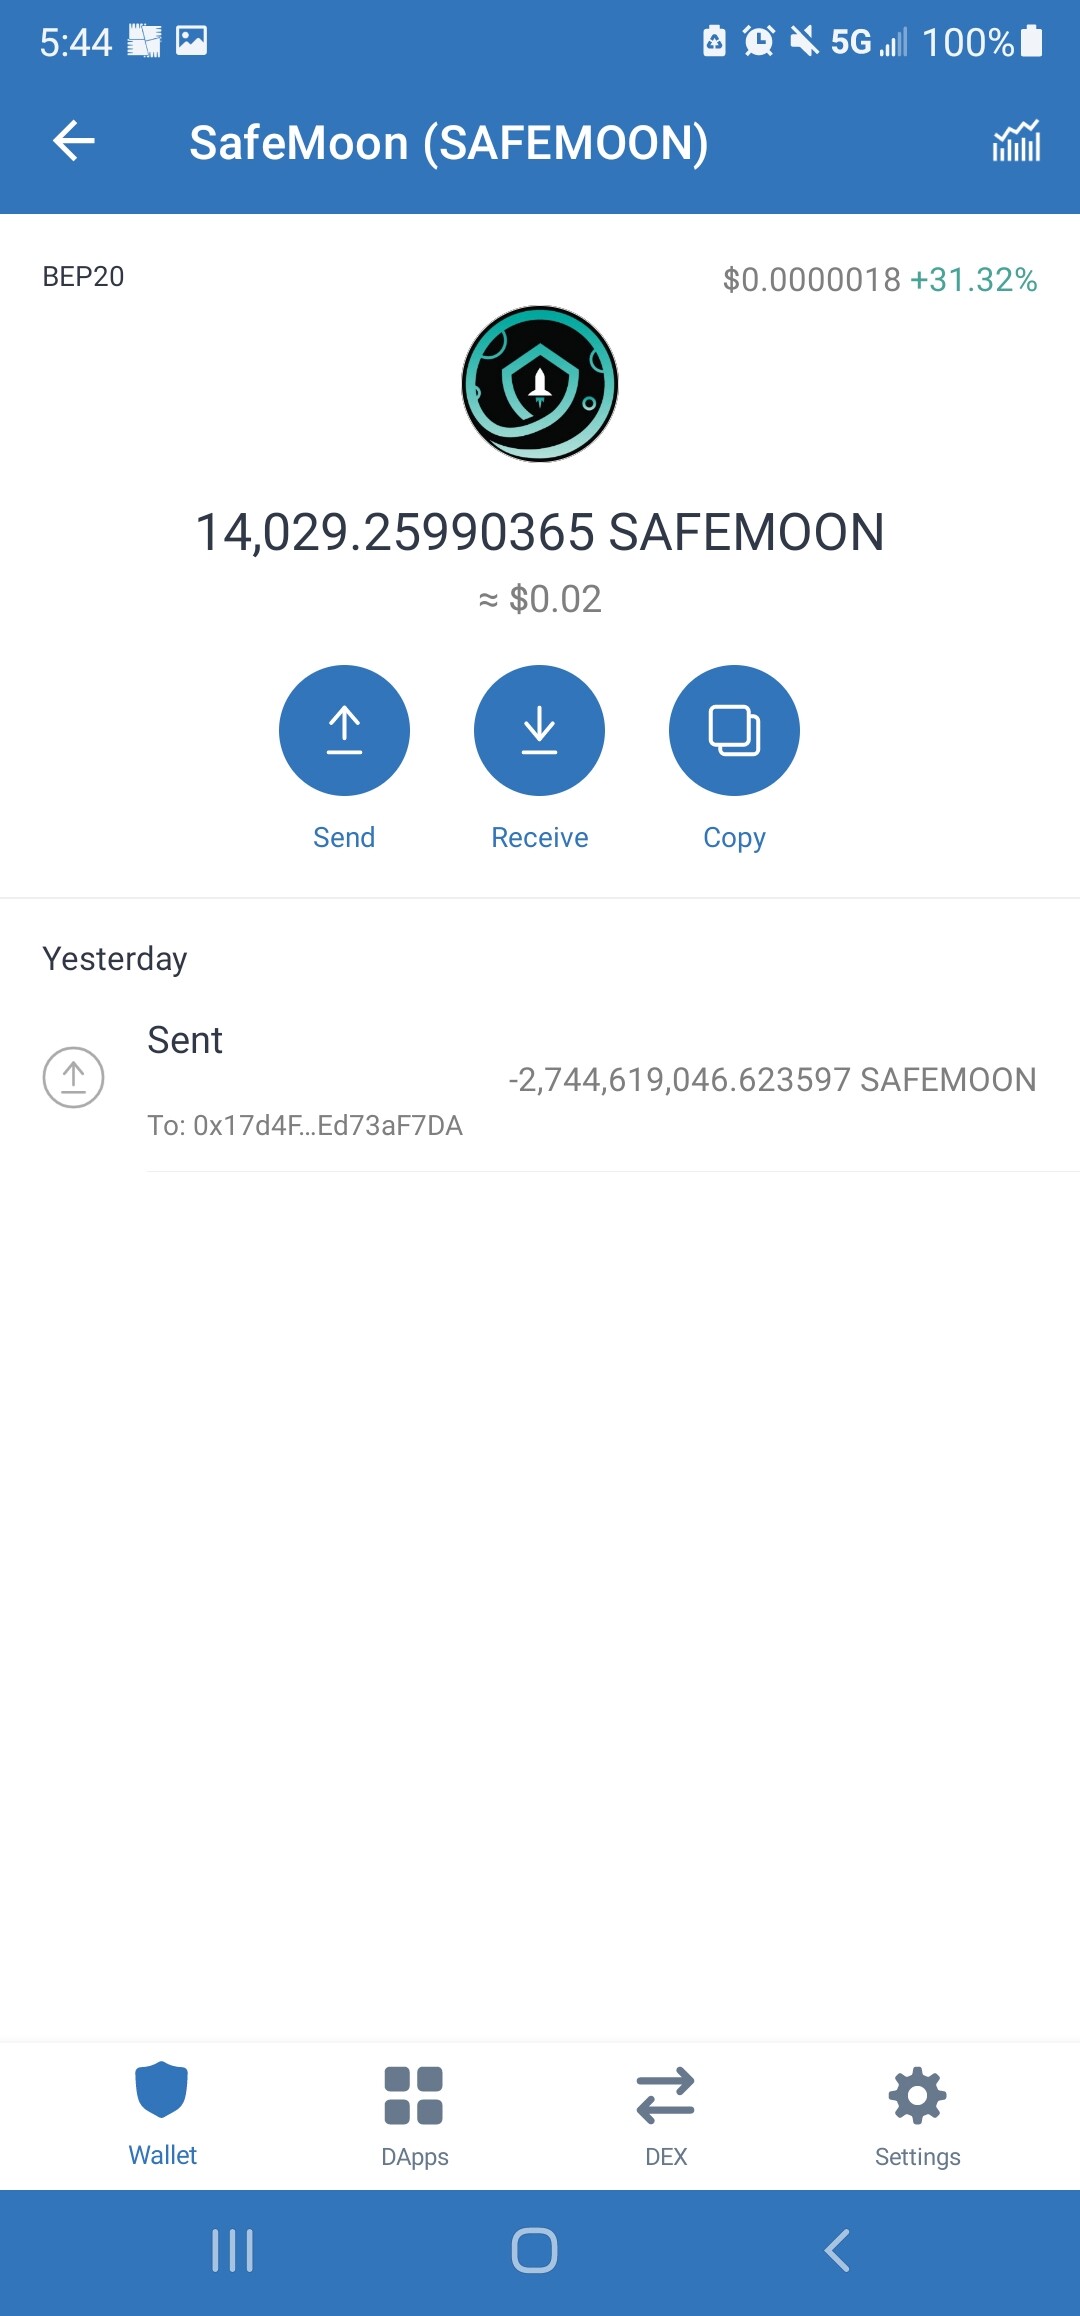 Safemoon wallet